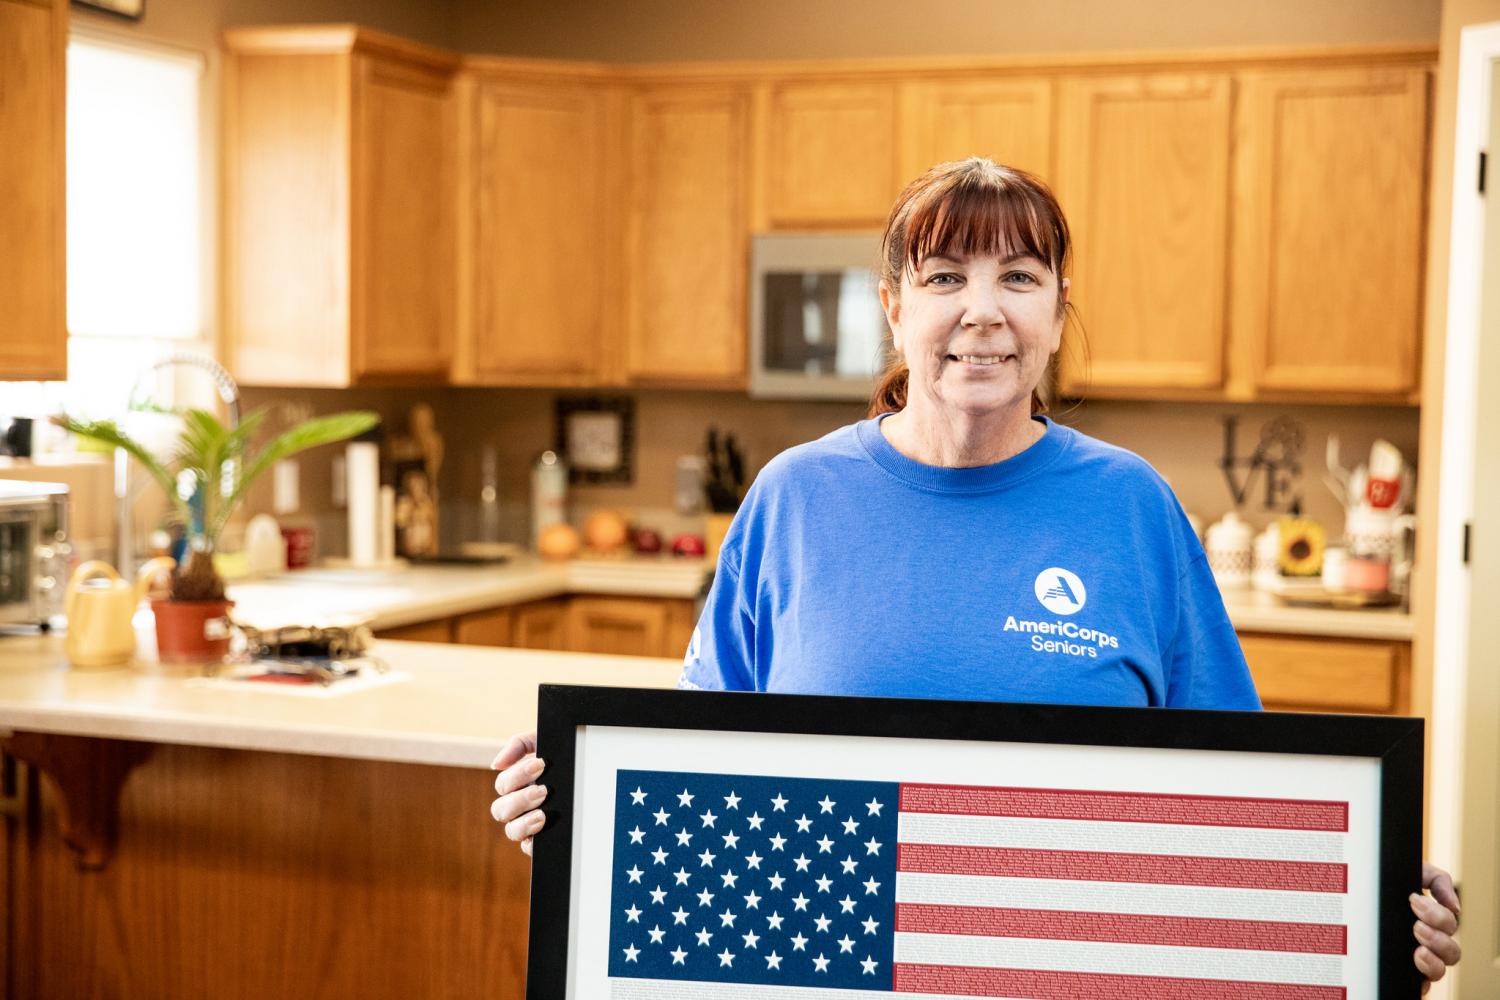 Woman in an AmeriCorps Seniors shirt stands with an American flag